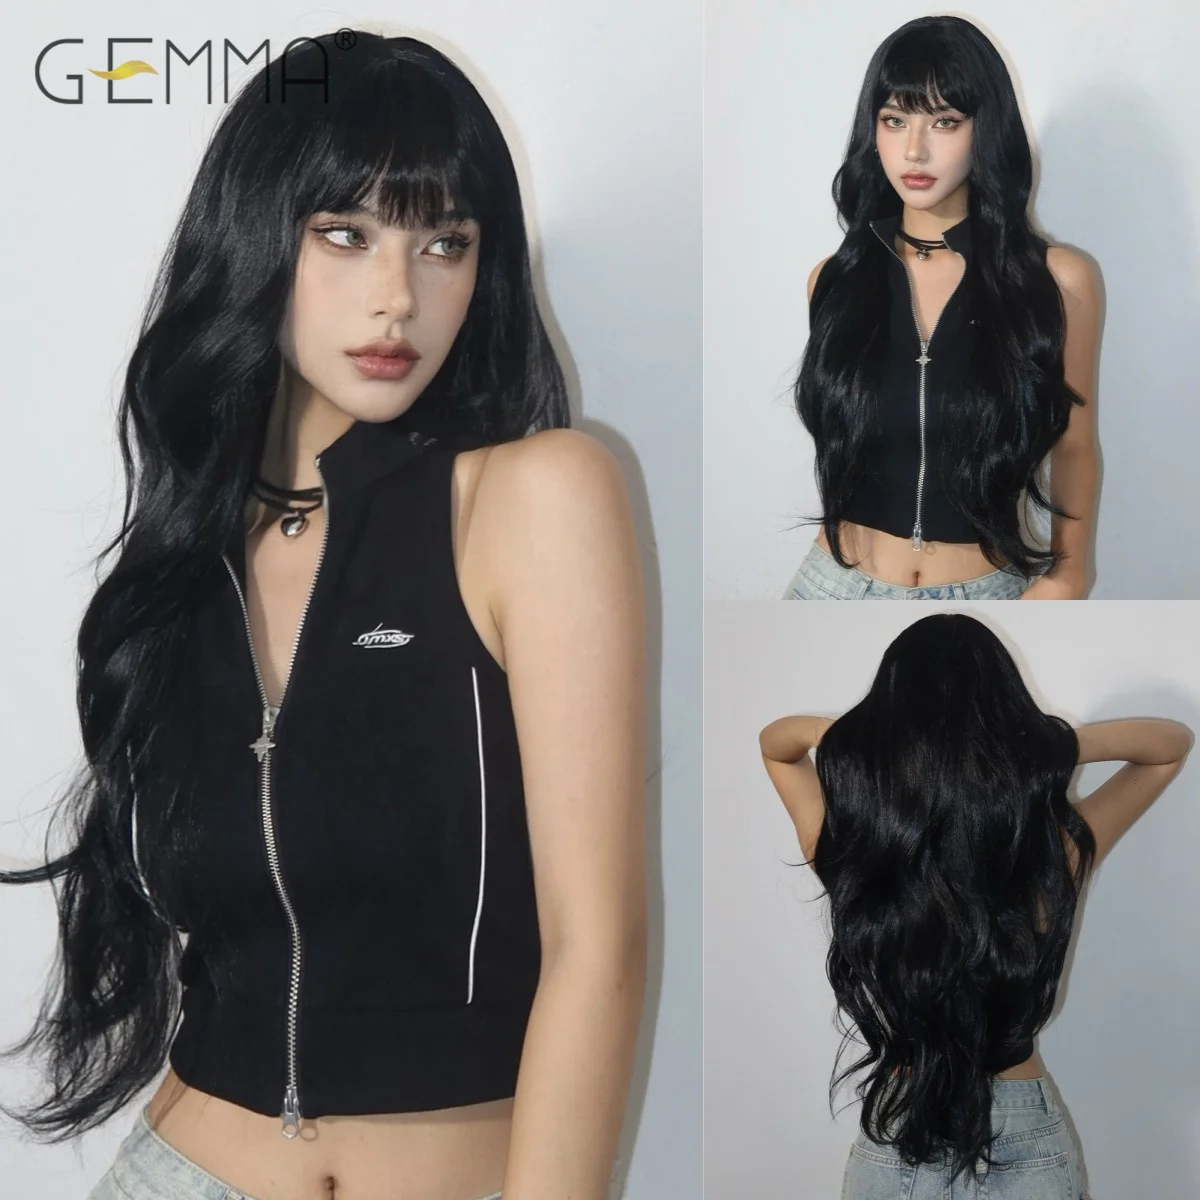 Black Synthetic Long Wavy Wig with Fluffy Bangs Natural Wave Wigs for Women Cosplay Daily Use Fake Hair Heat Resistant Fibre black synthetic long wavy wig with fluffy bangs natural wave wigs for women cosplay daily use fake hair heat resistant fibre